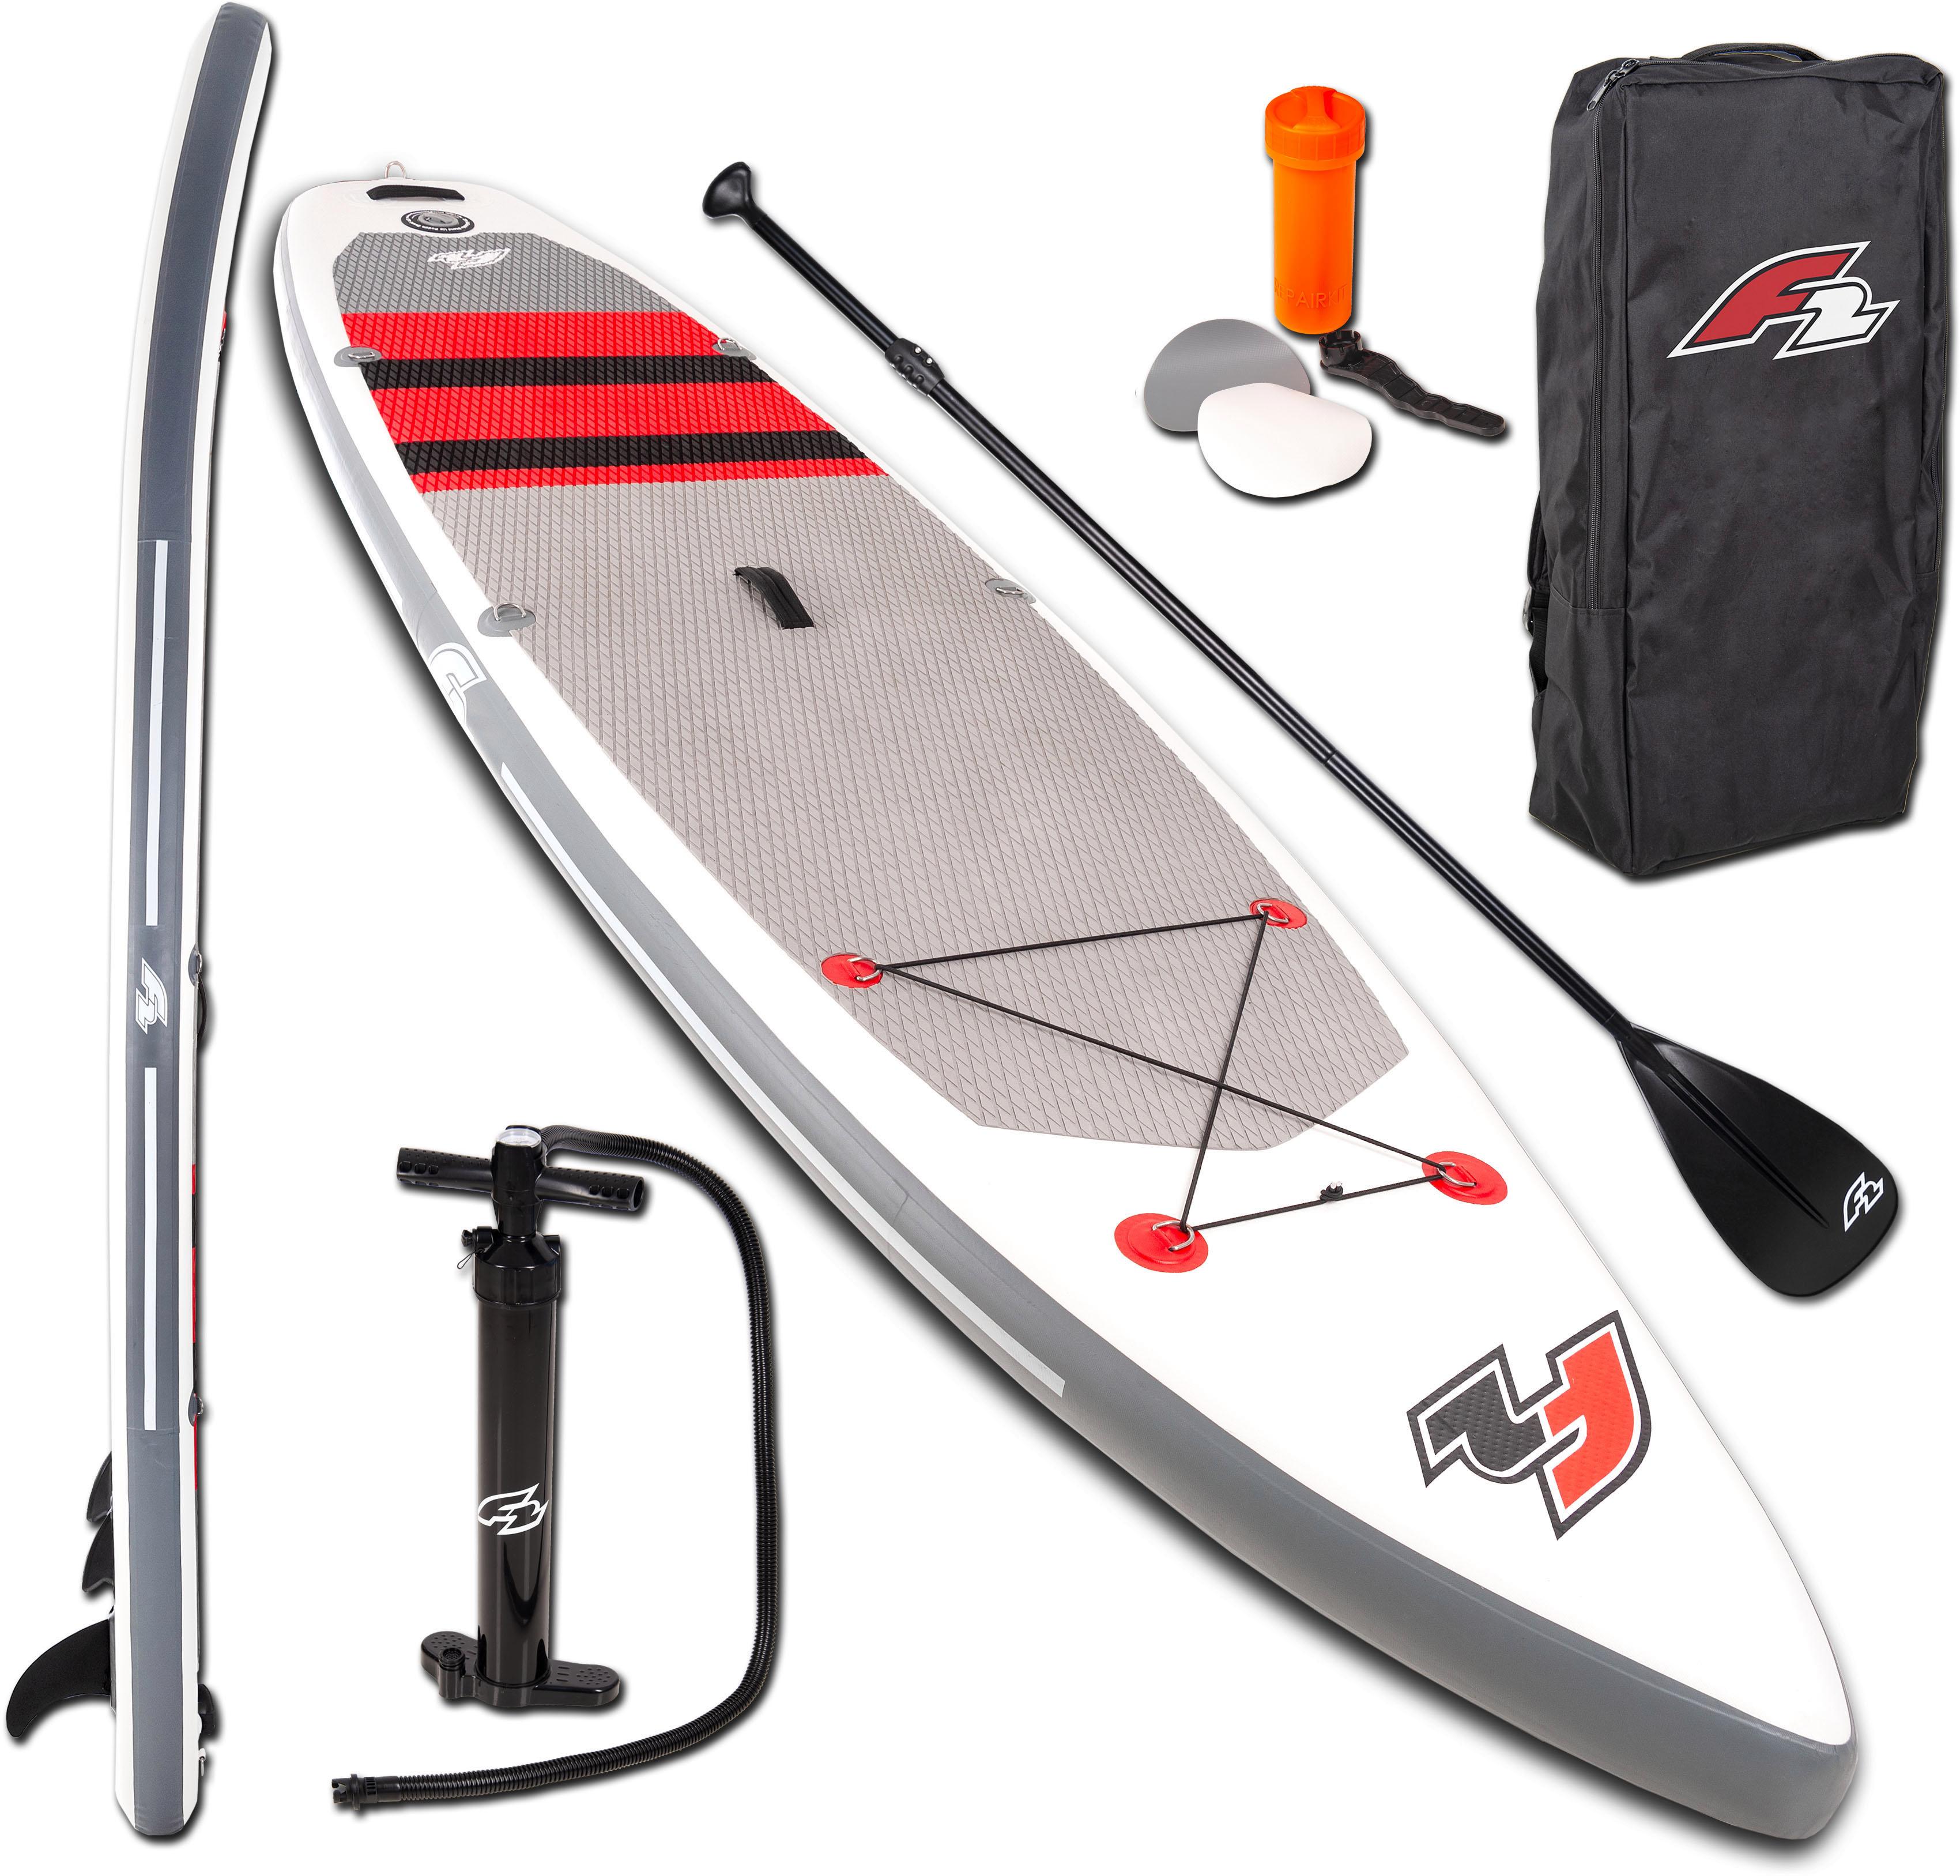 11,5«, kaufen 5 bei Paddling F2 »Union Inflatable Up OTTO tlg.), Stand SUP-Board (Set,